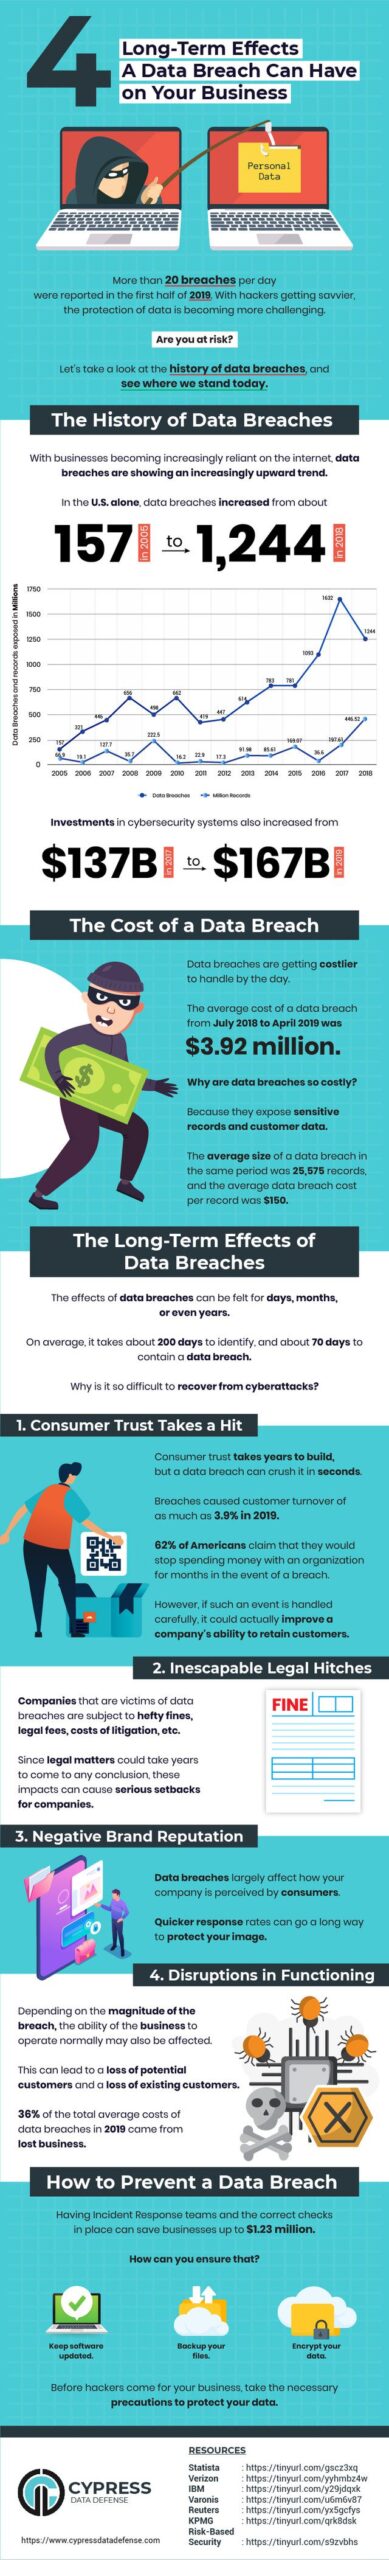 Effects a Data Breach Can Have on Your Business in the Long Term